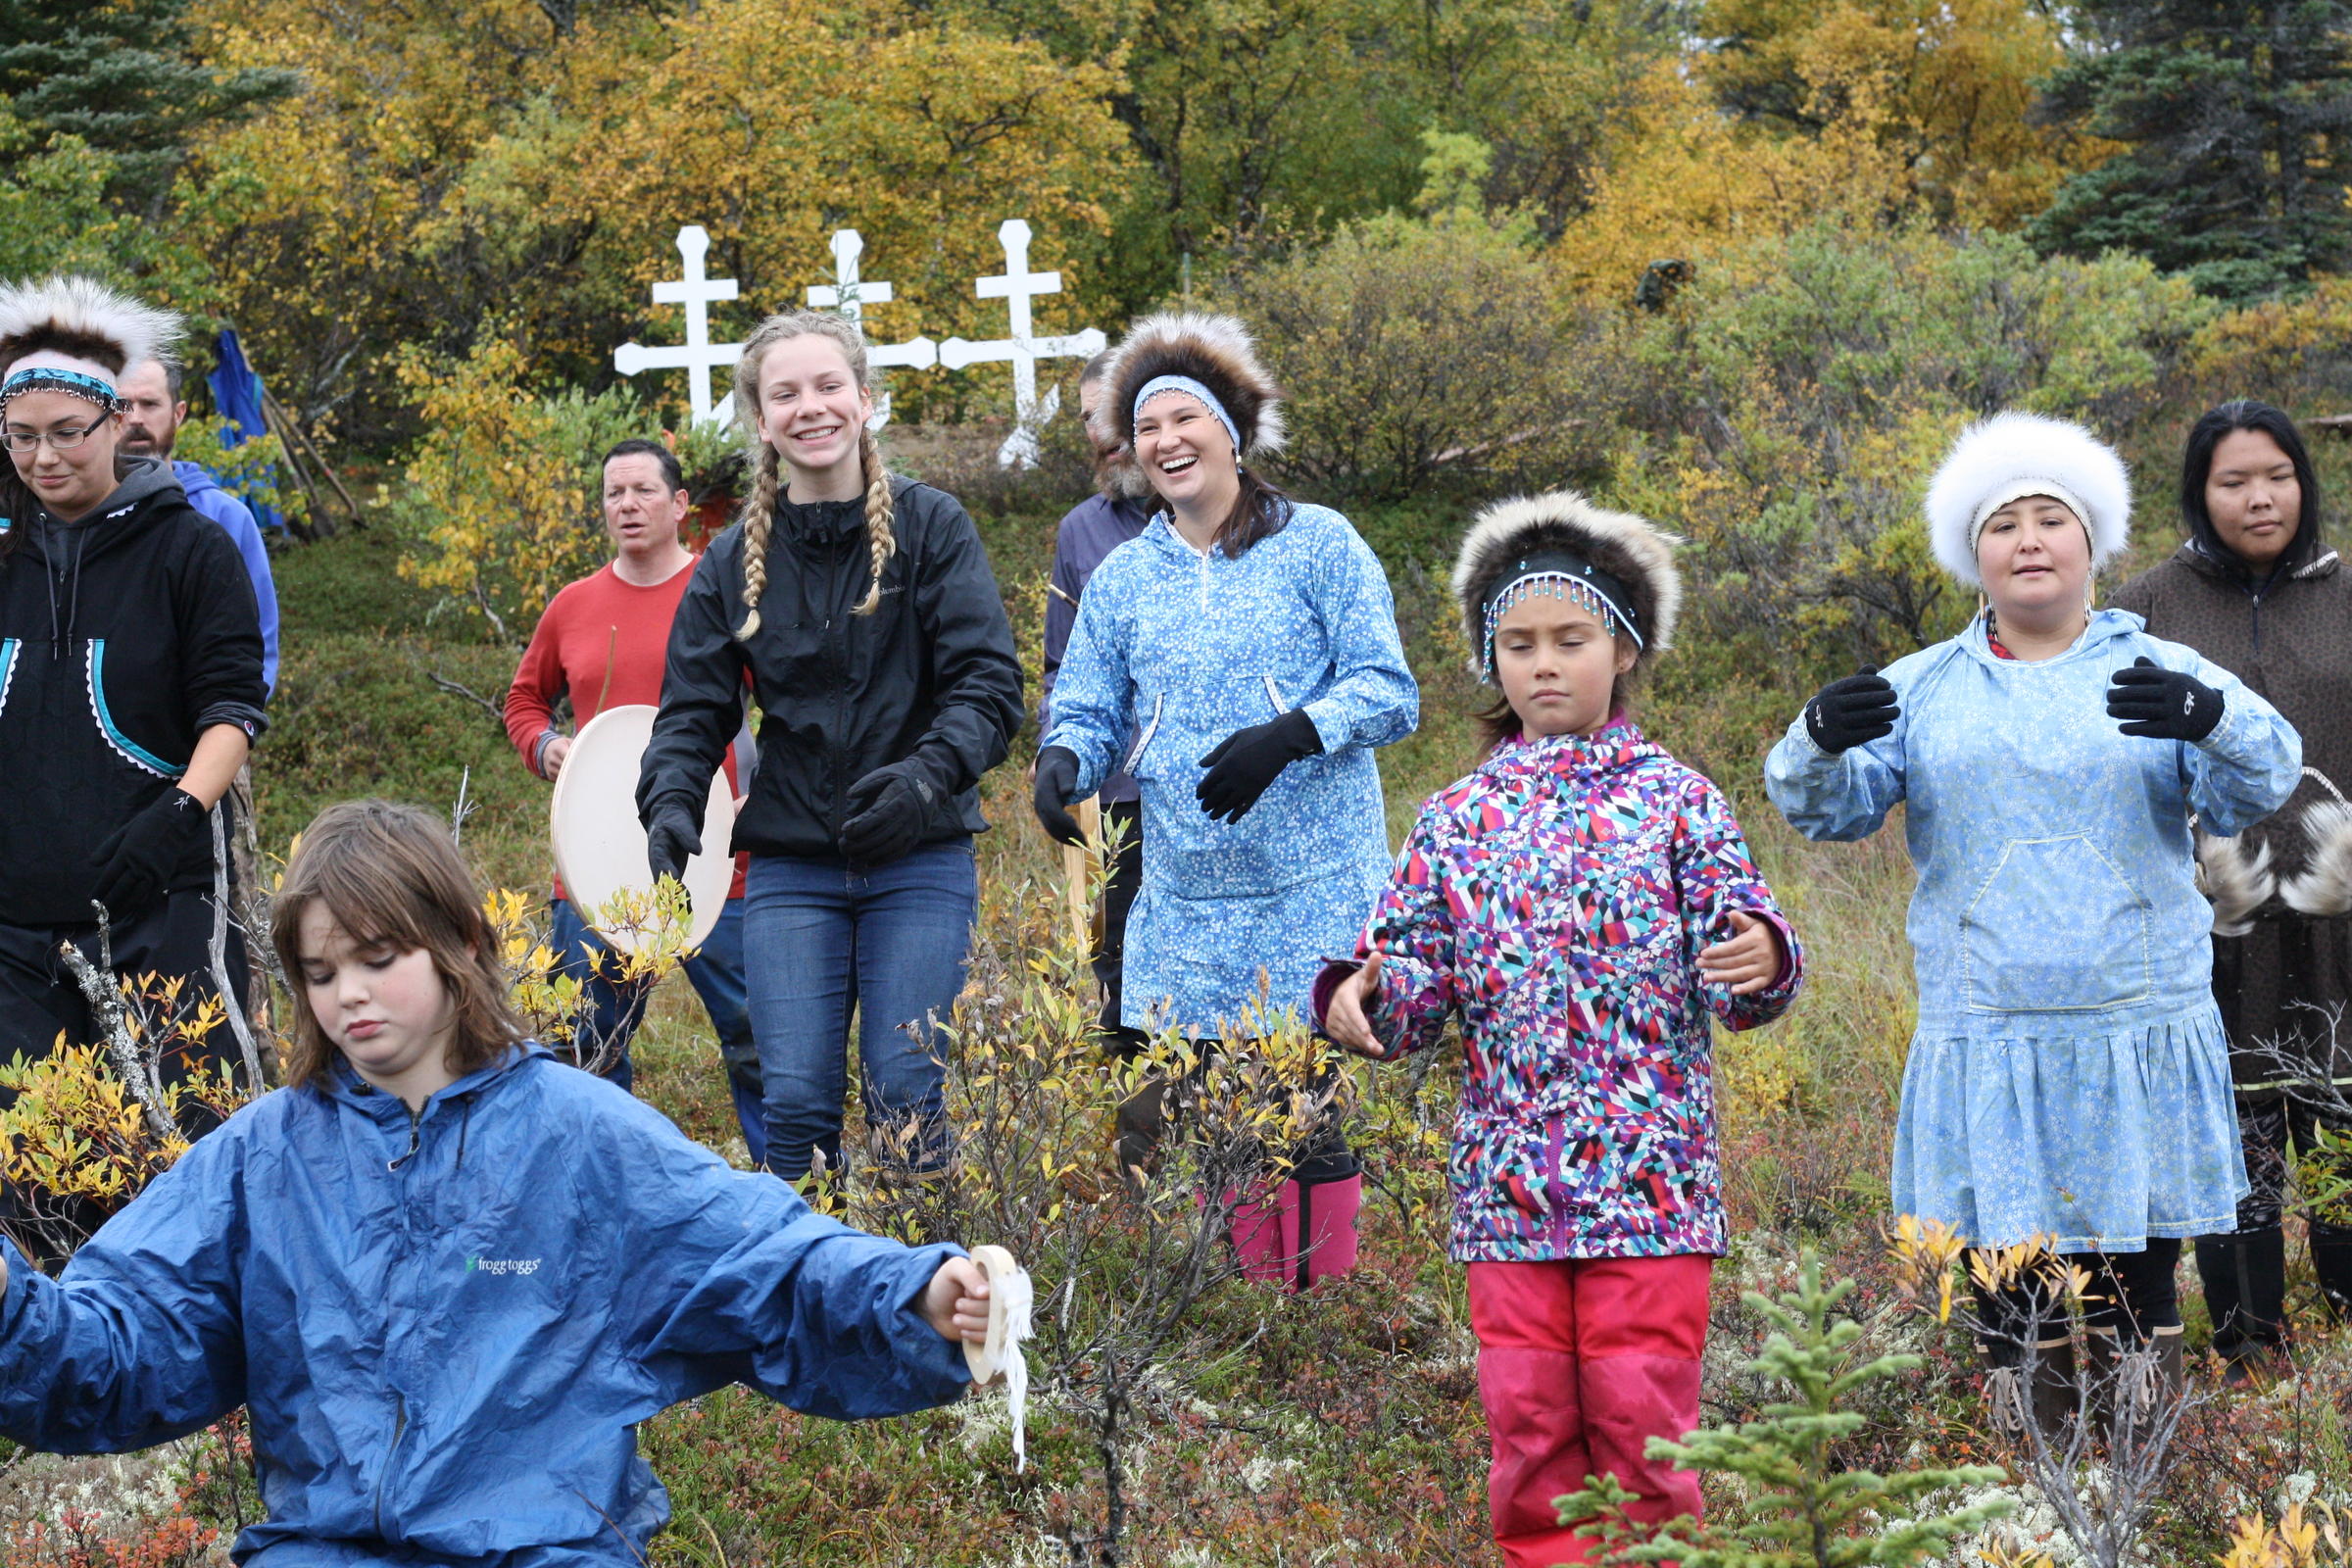 Celebrating the repatriation of remains at a cemetery near Igiugig in September. (Photo by KDLG)